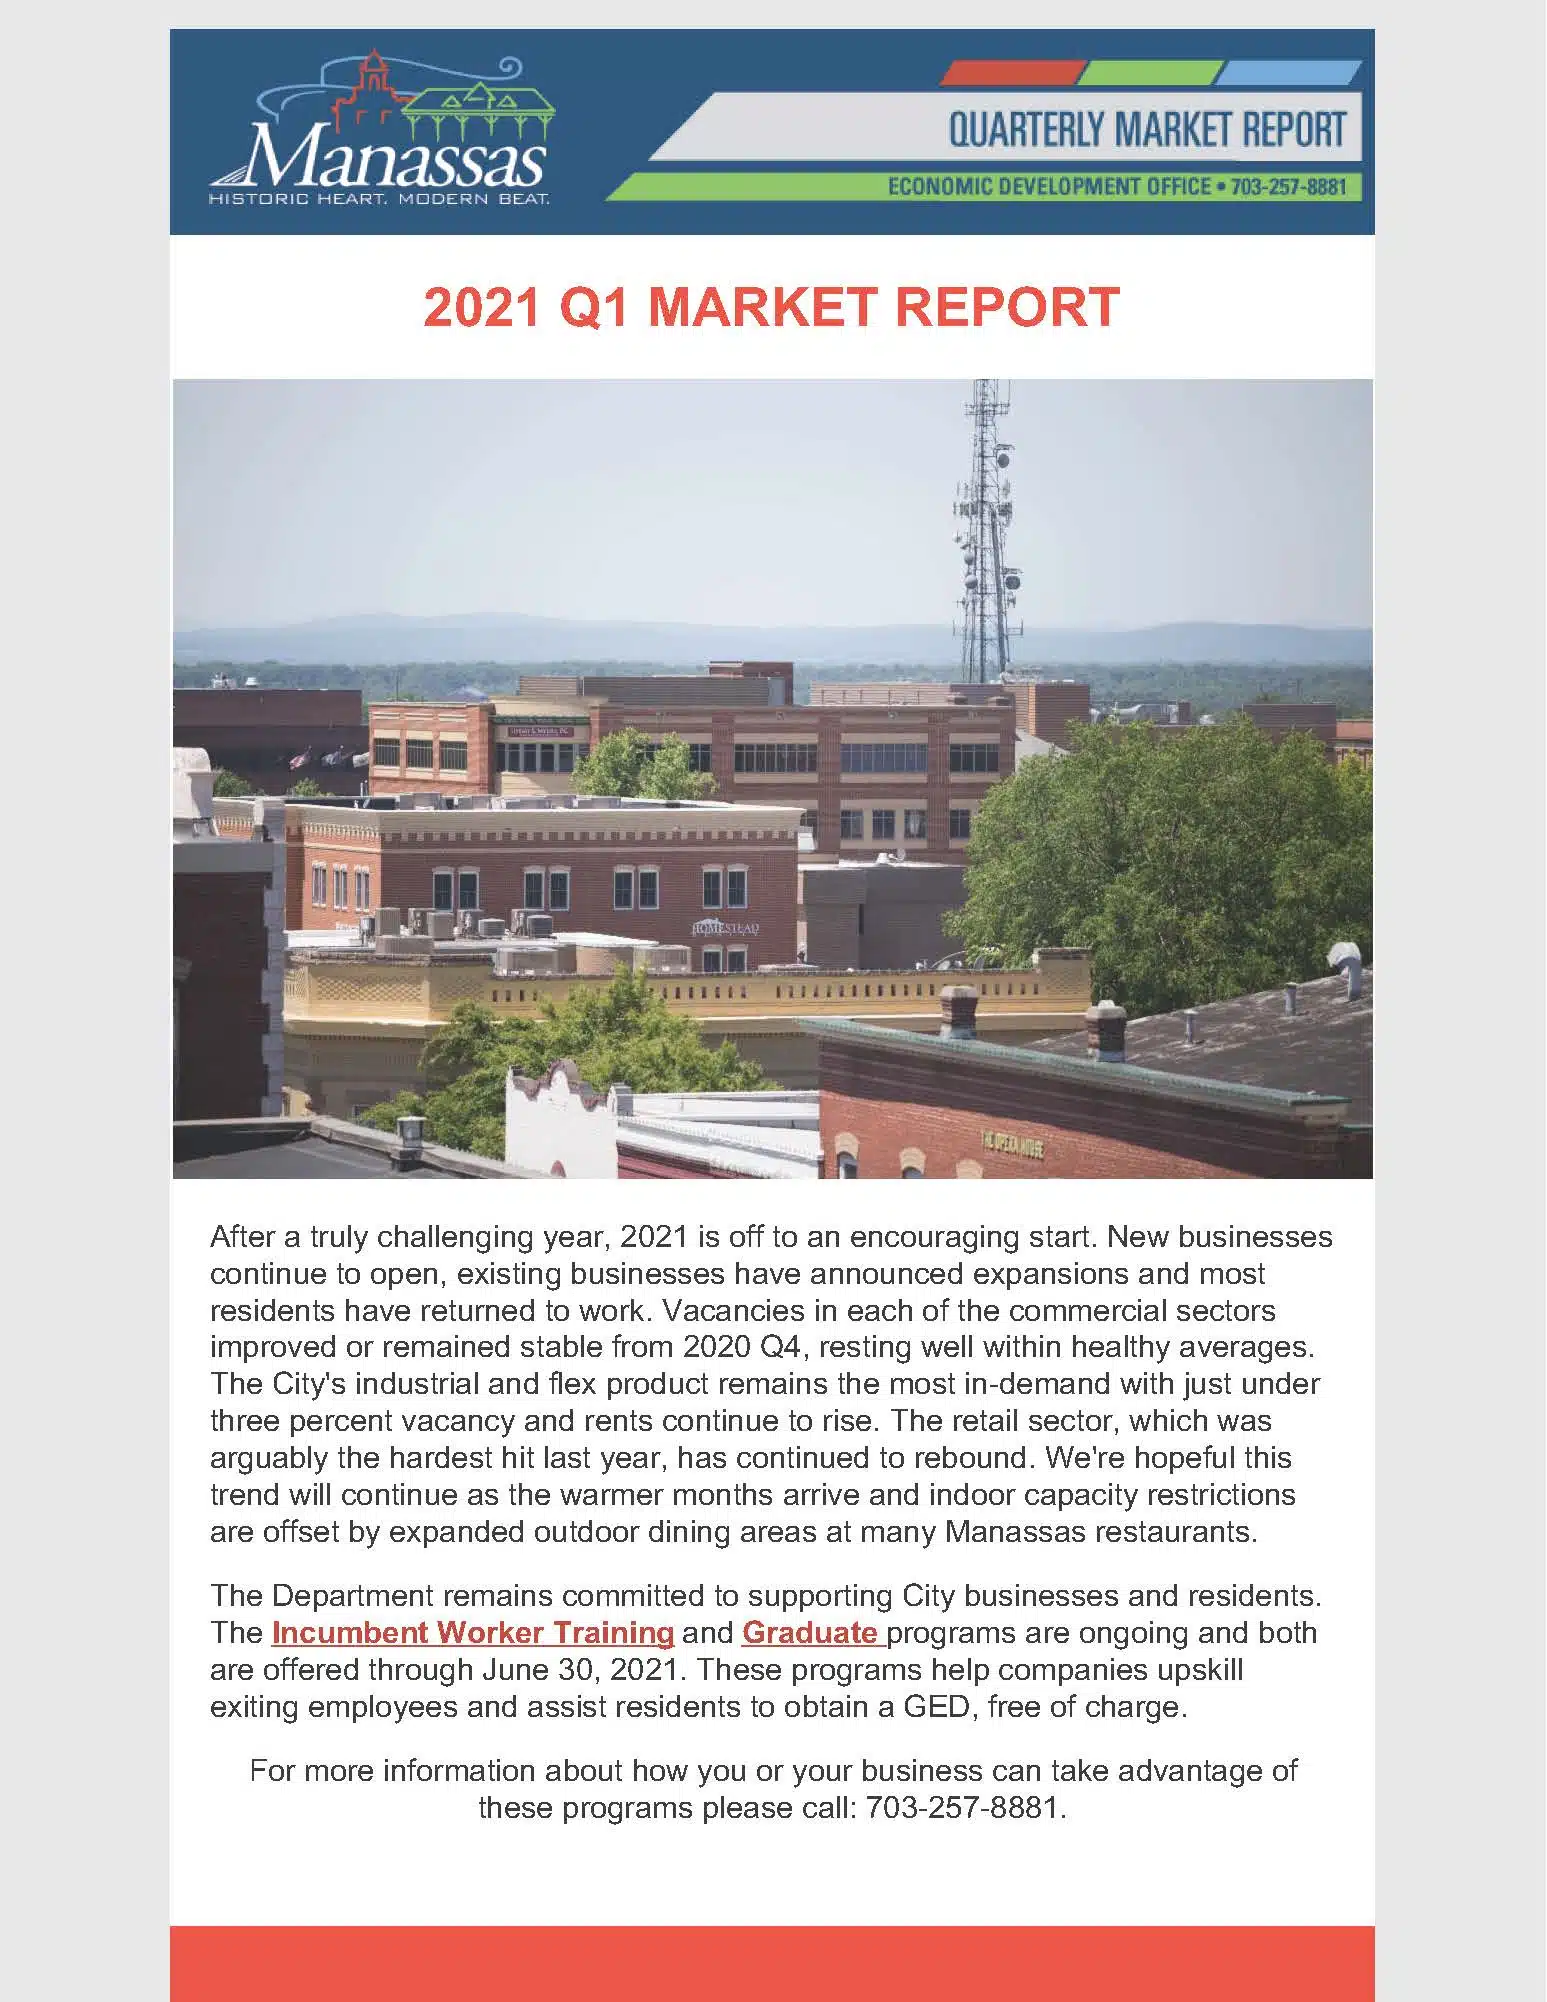 Q1-2021-Market-Report-4-22-21_Page_1 Reports & Resources